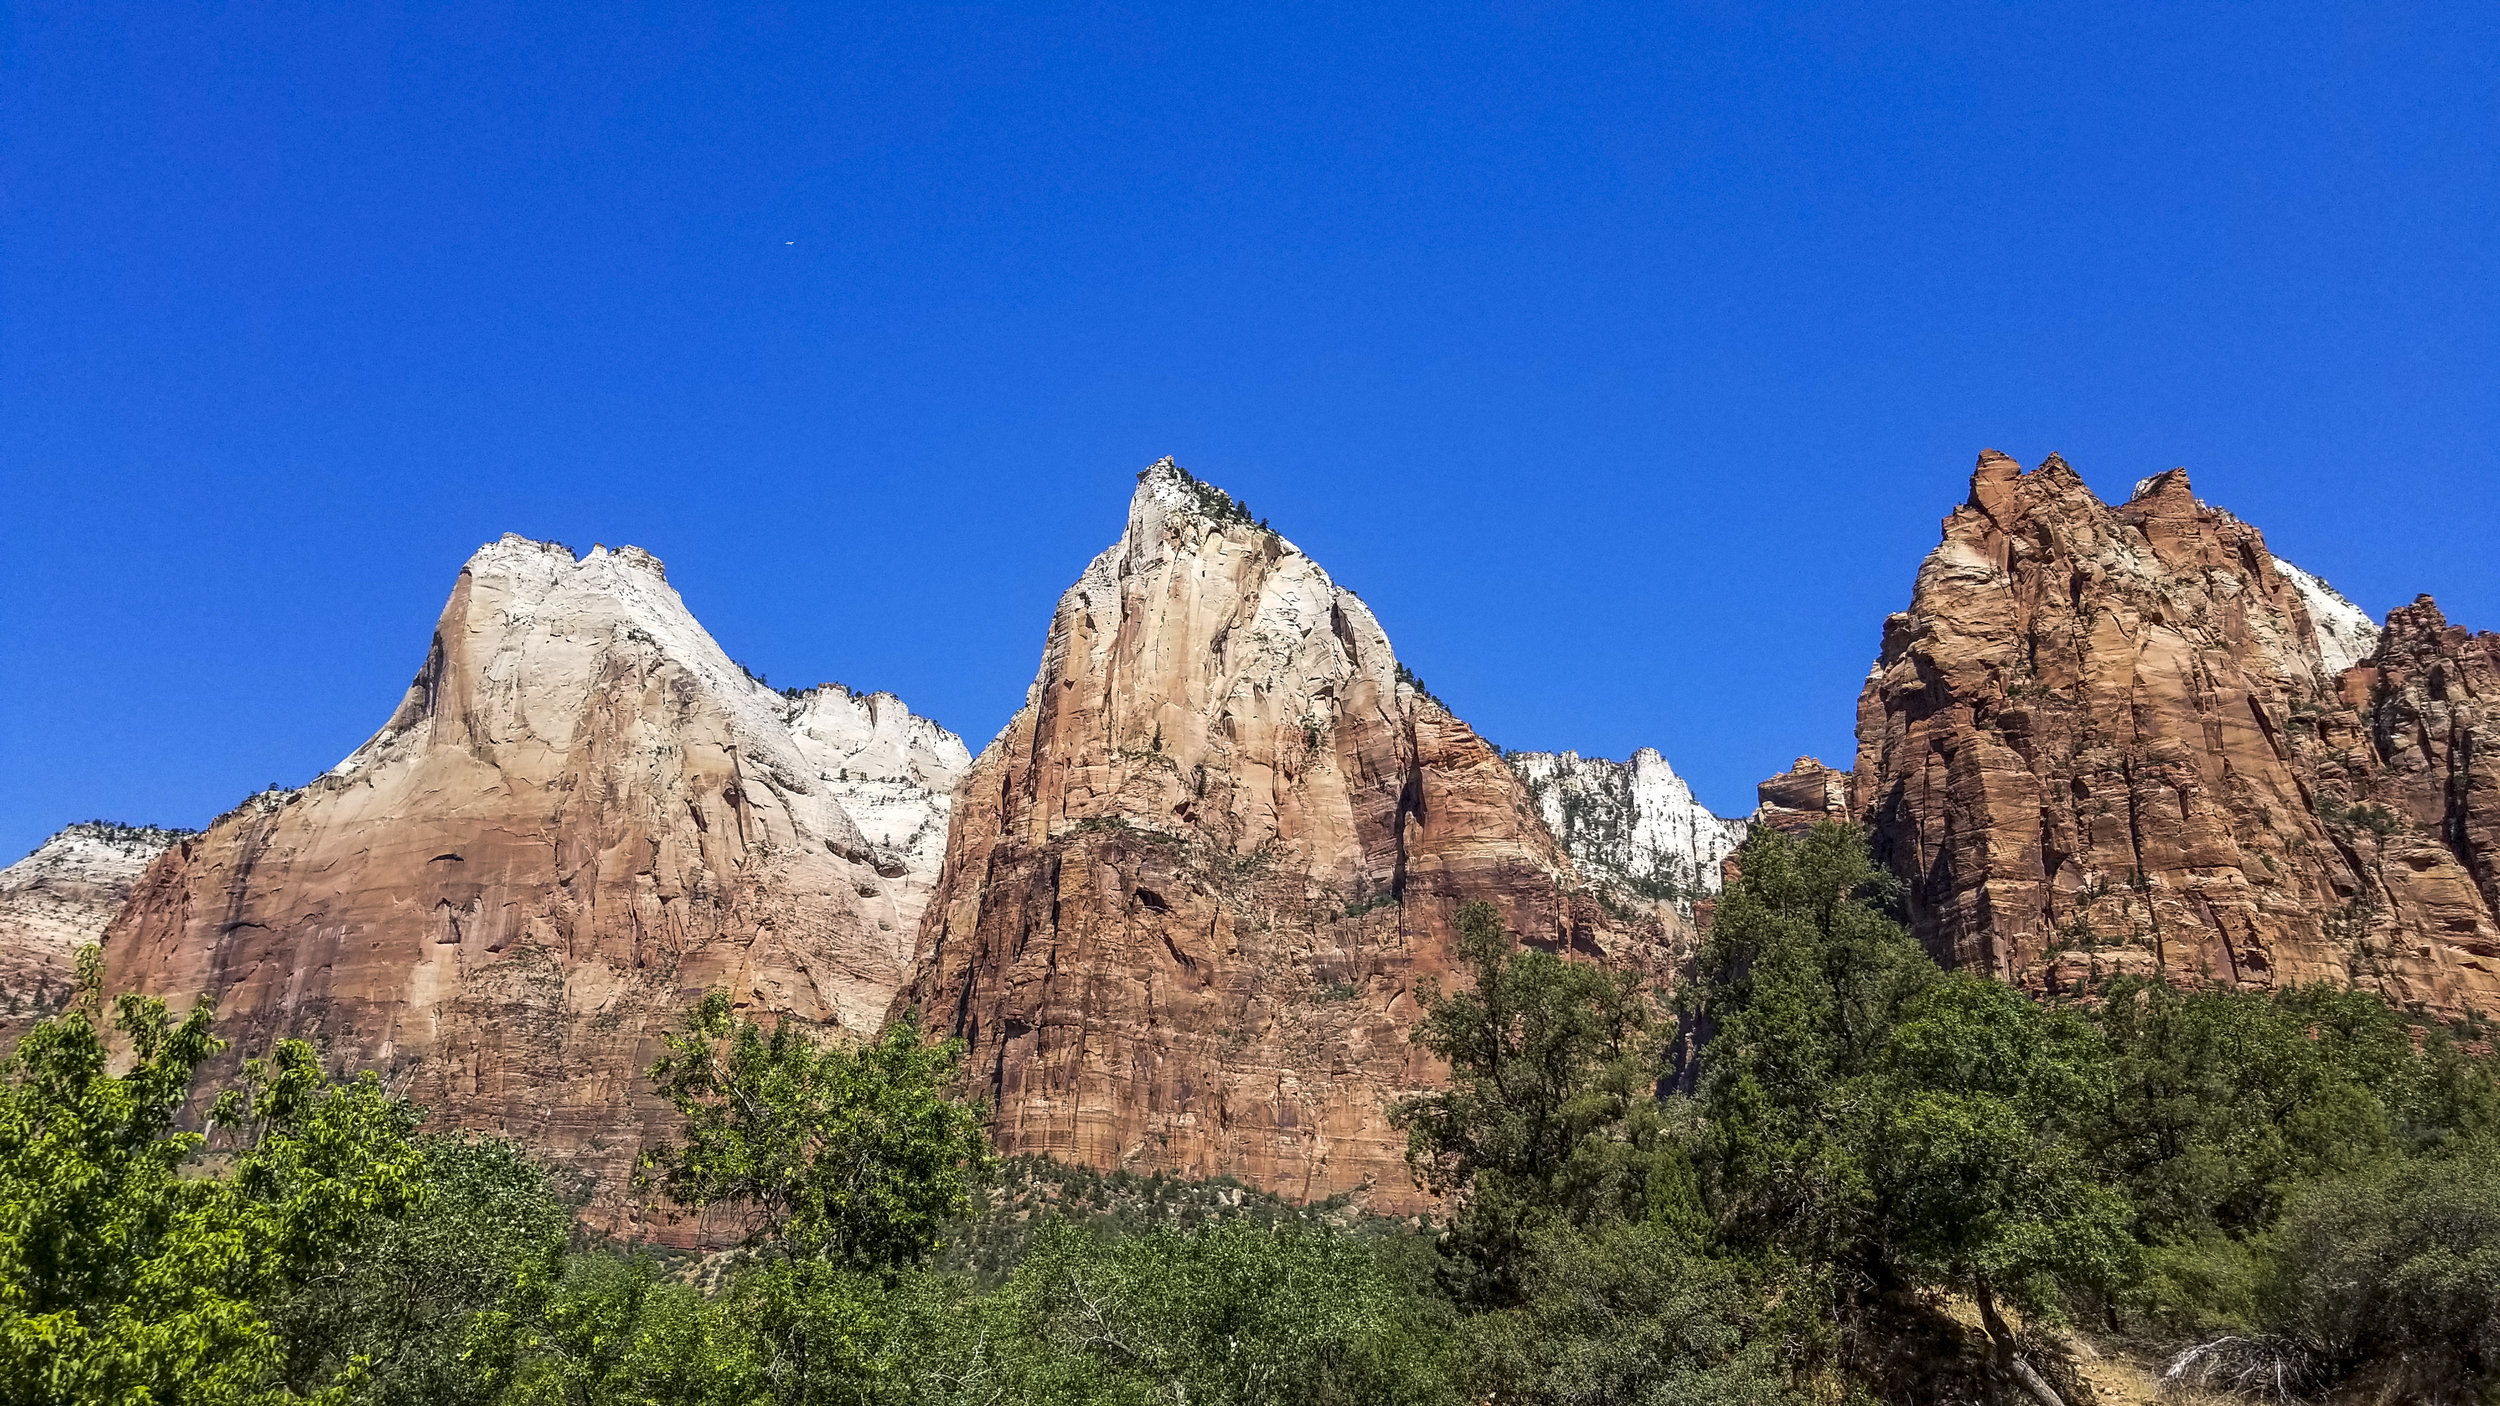  The cliffs of Zion National Park toward above the road in Utah on Friday, July 14, 2017.  Patrick Connolly Las Vegas Review-Journal @PConnPie 